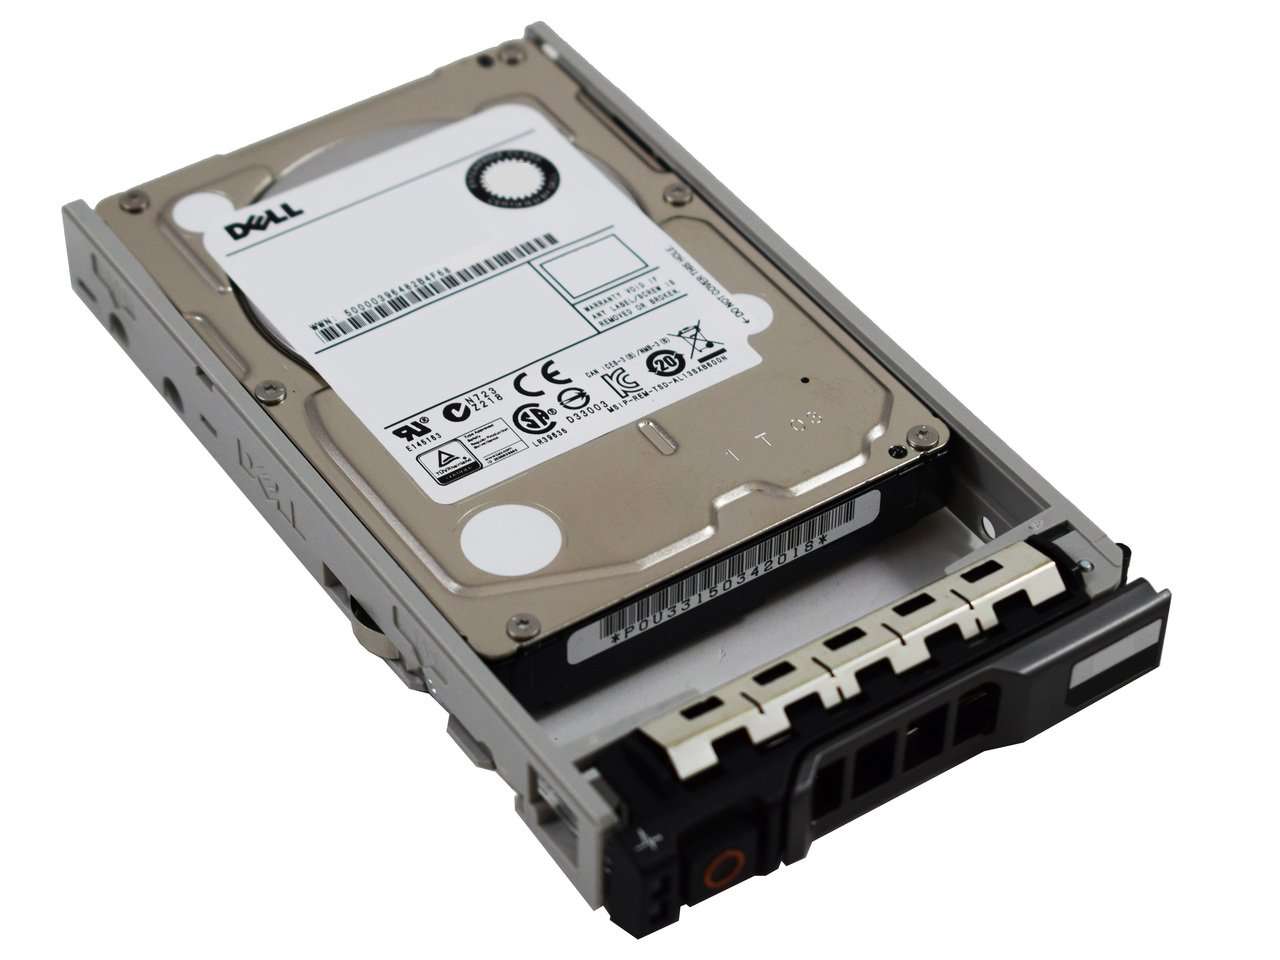 Dell G13 342-1135 600GB 10K RPM SAS 6Gb/s 512n 2.5" Manufacturer Recertified HDD